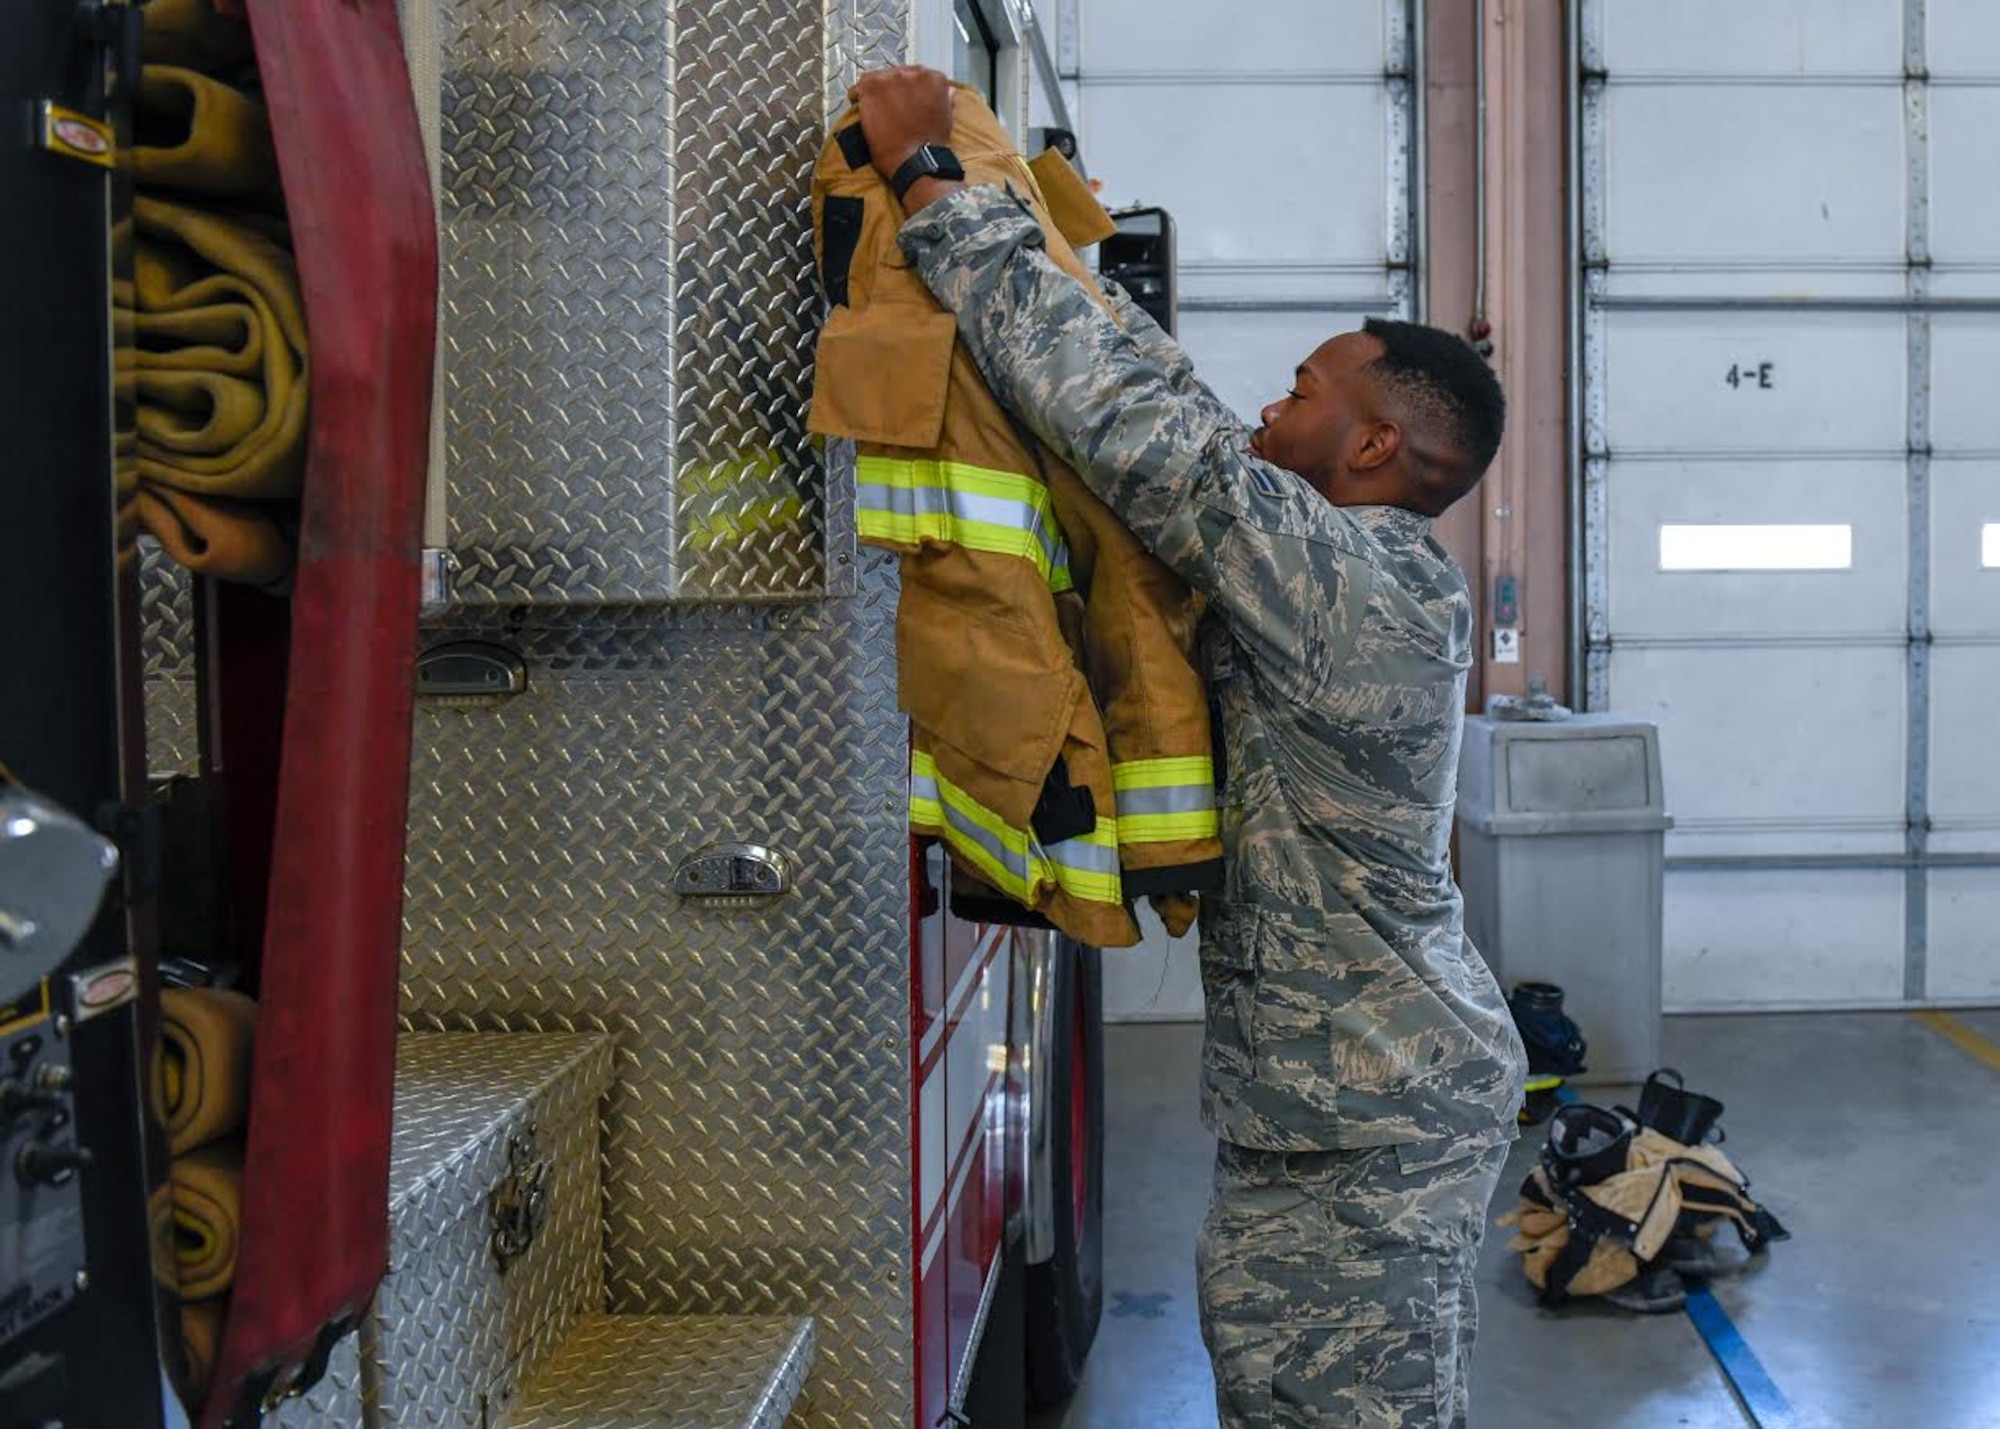 After responding to a car accident, Airman 1st Class Emmanuel Willis, 56th Civil Engineer Squadron firefighter, repositions his turnout gear for the next call Dec. 9, 2019, at the Luke Air Force Base Fire Department, Ariz.